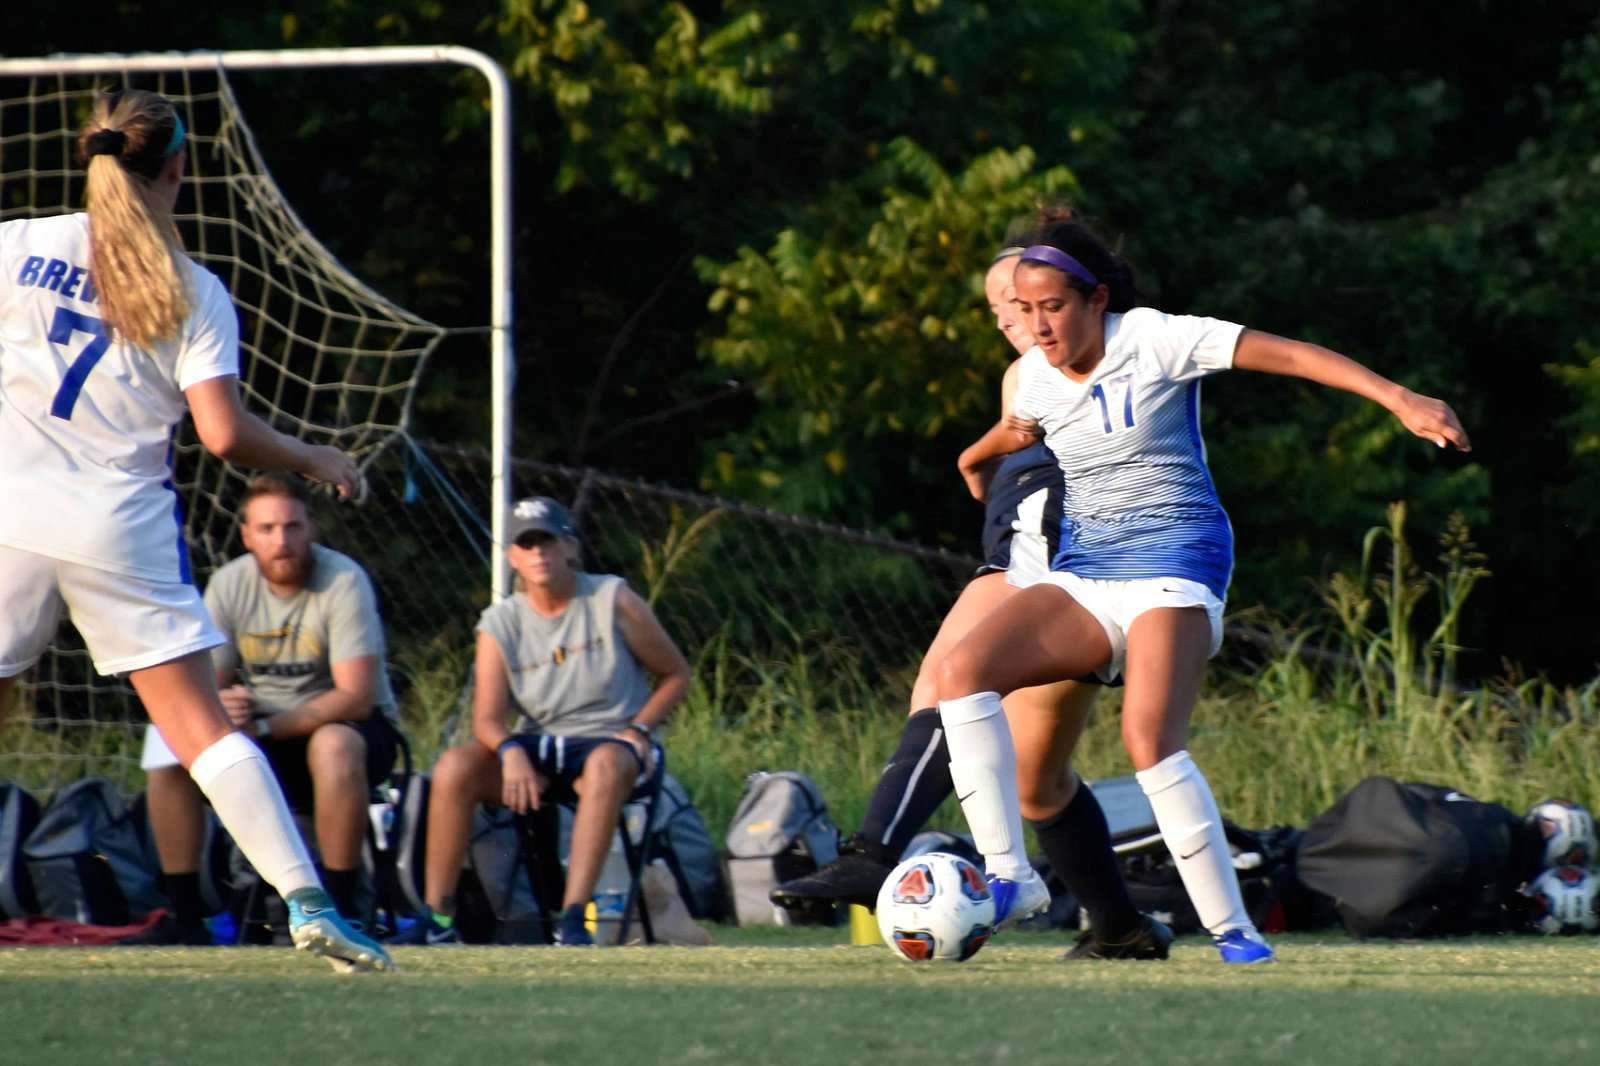 Freshman midfielder Brianna Link's game-winning golden goal in overtime pushes the Tornados past the Wildcats (Courtesy of John Innis).